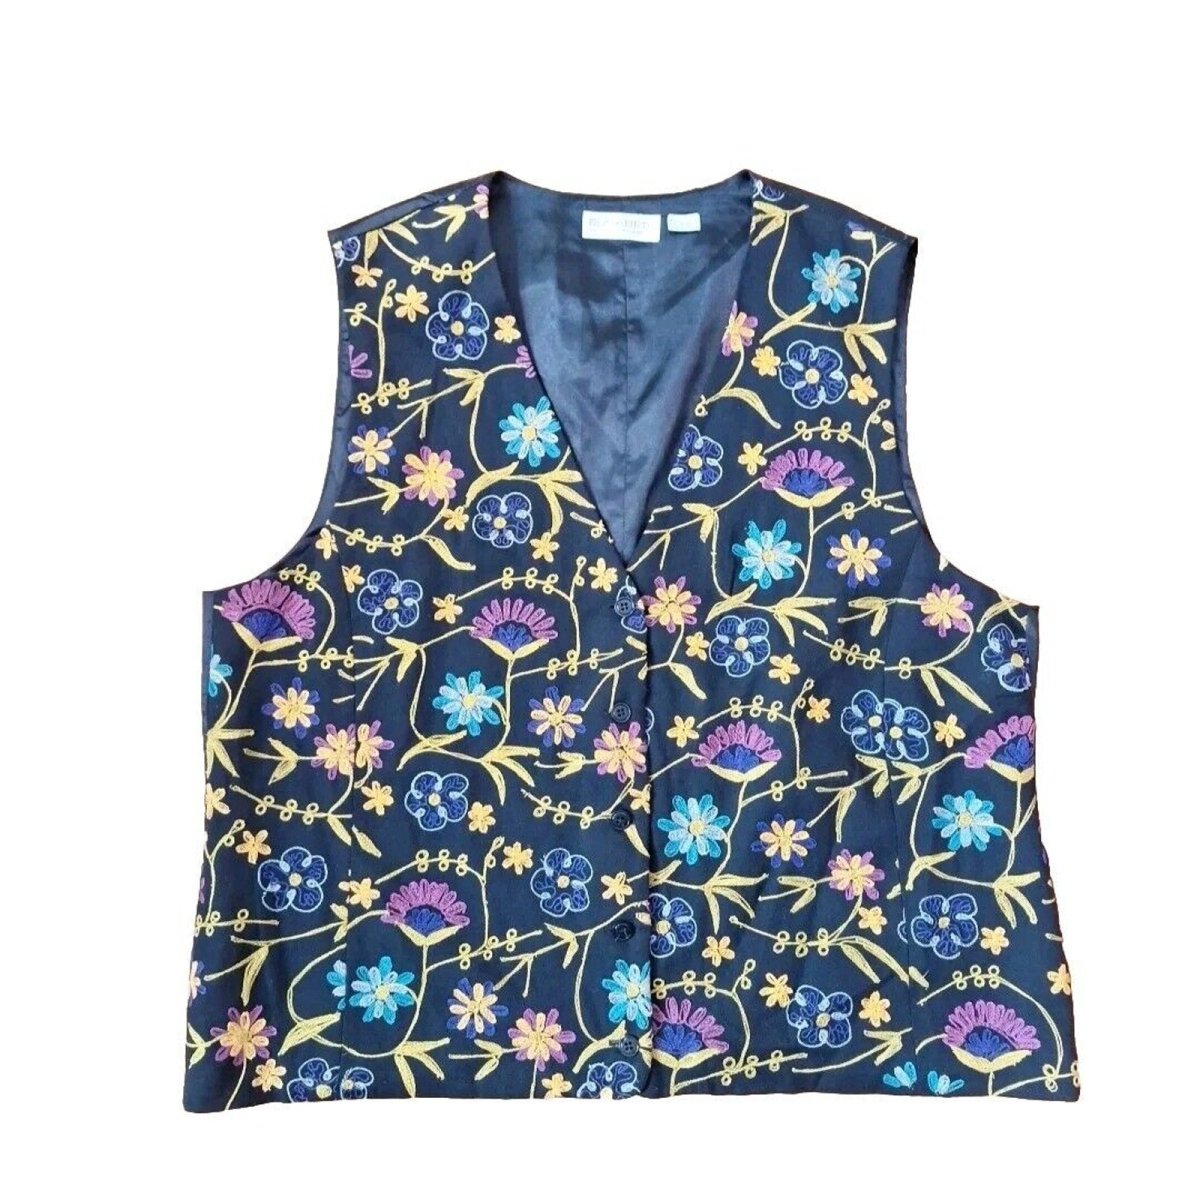 Vintage 90s Floral Embroidered Vest Women Size 2X Chest 50" - themallvintage The Mall Vintage 1980s 1990s New Arrival